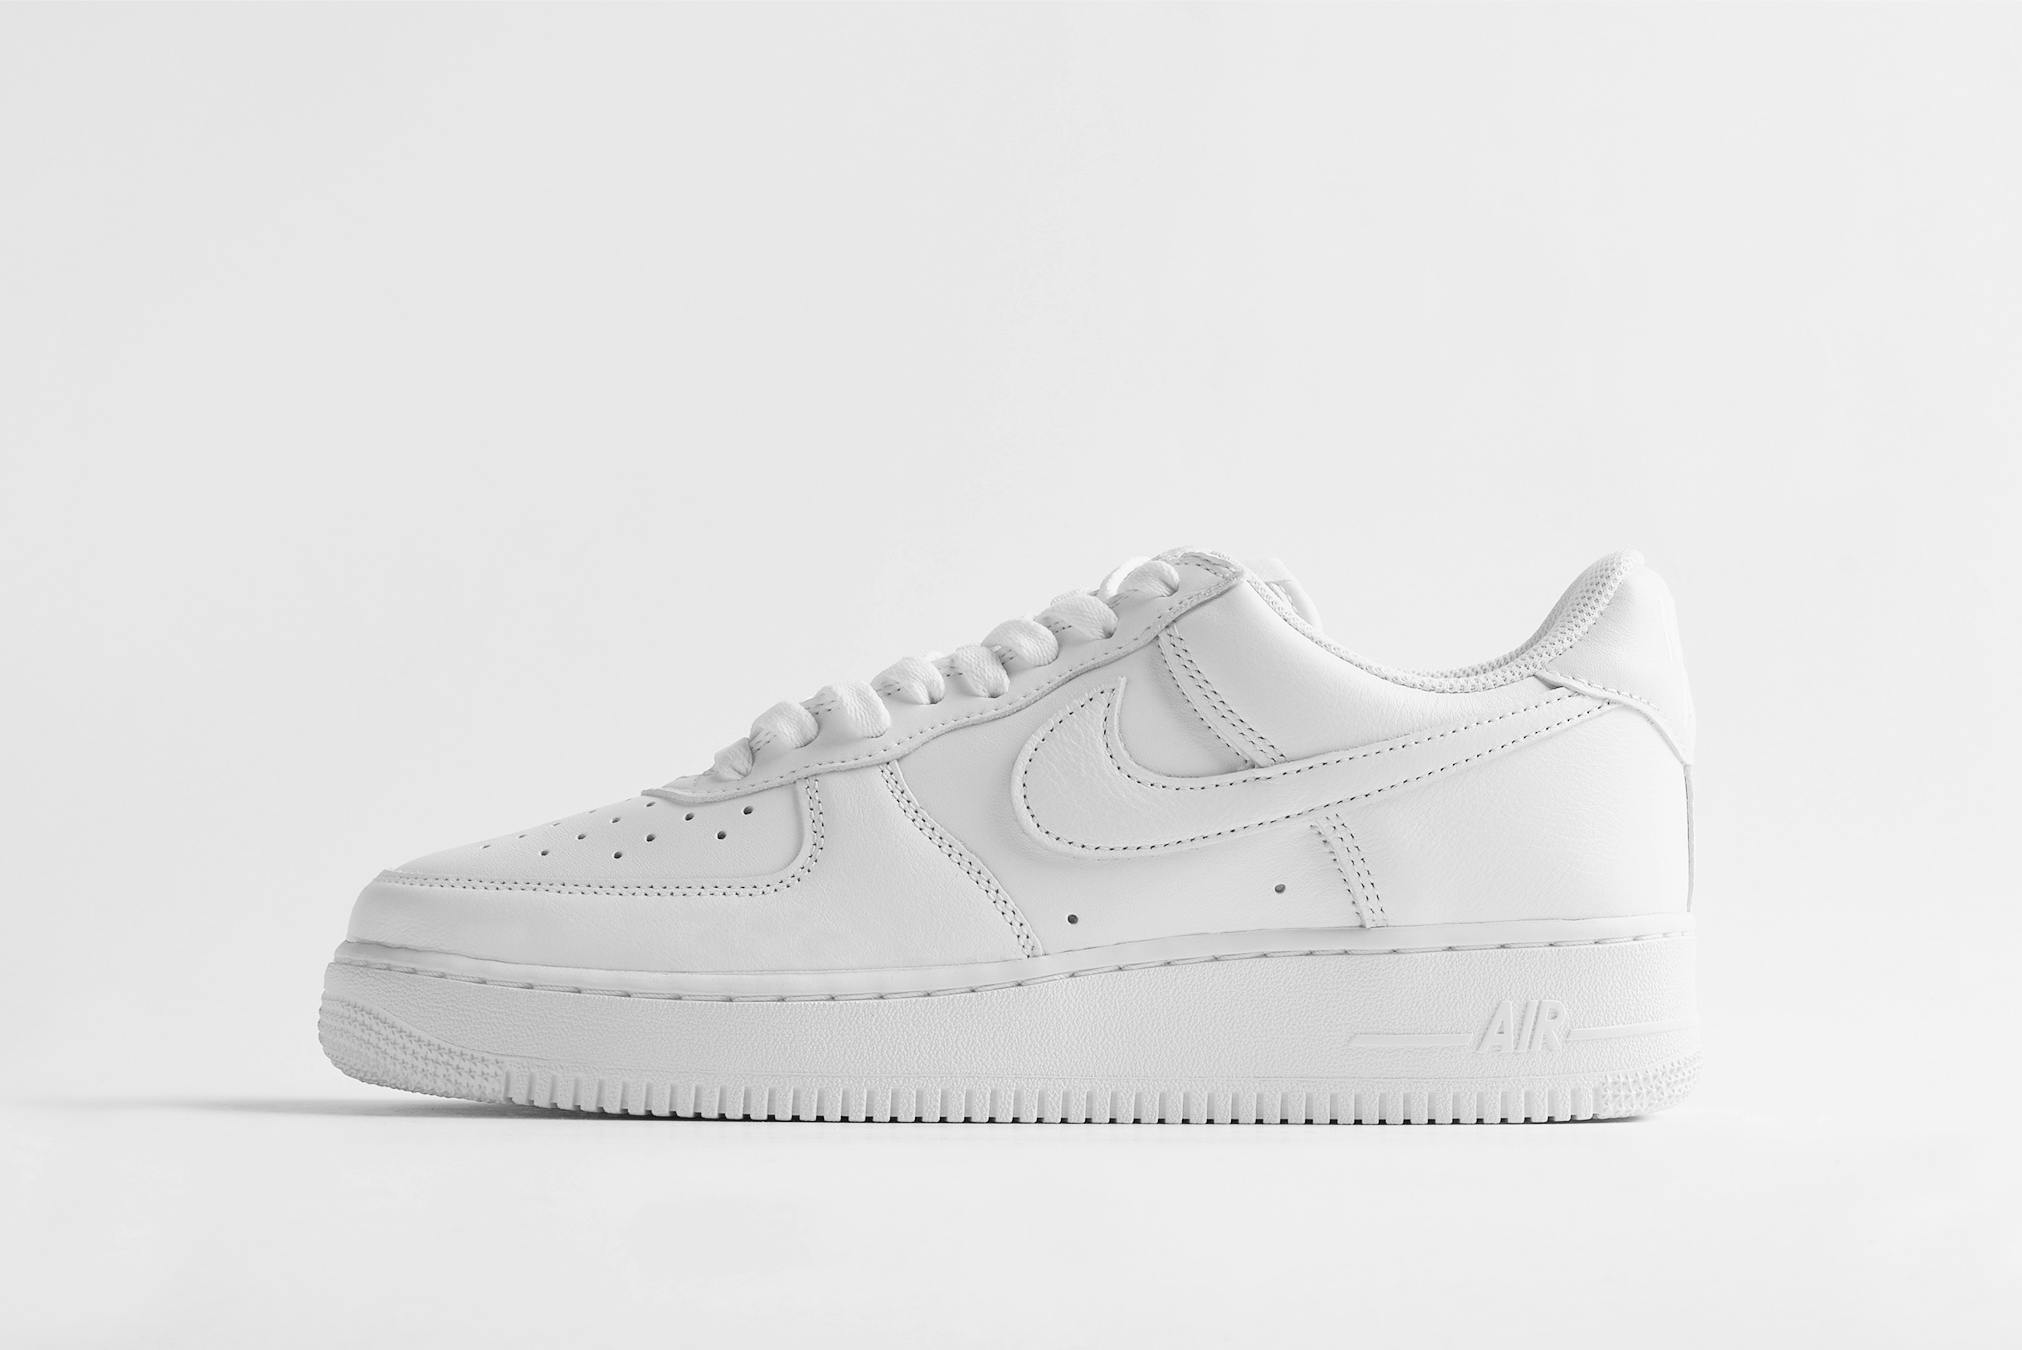 First Looks // Nike Air Force 1 “Overbranded”